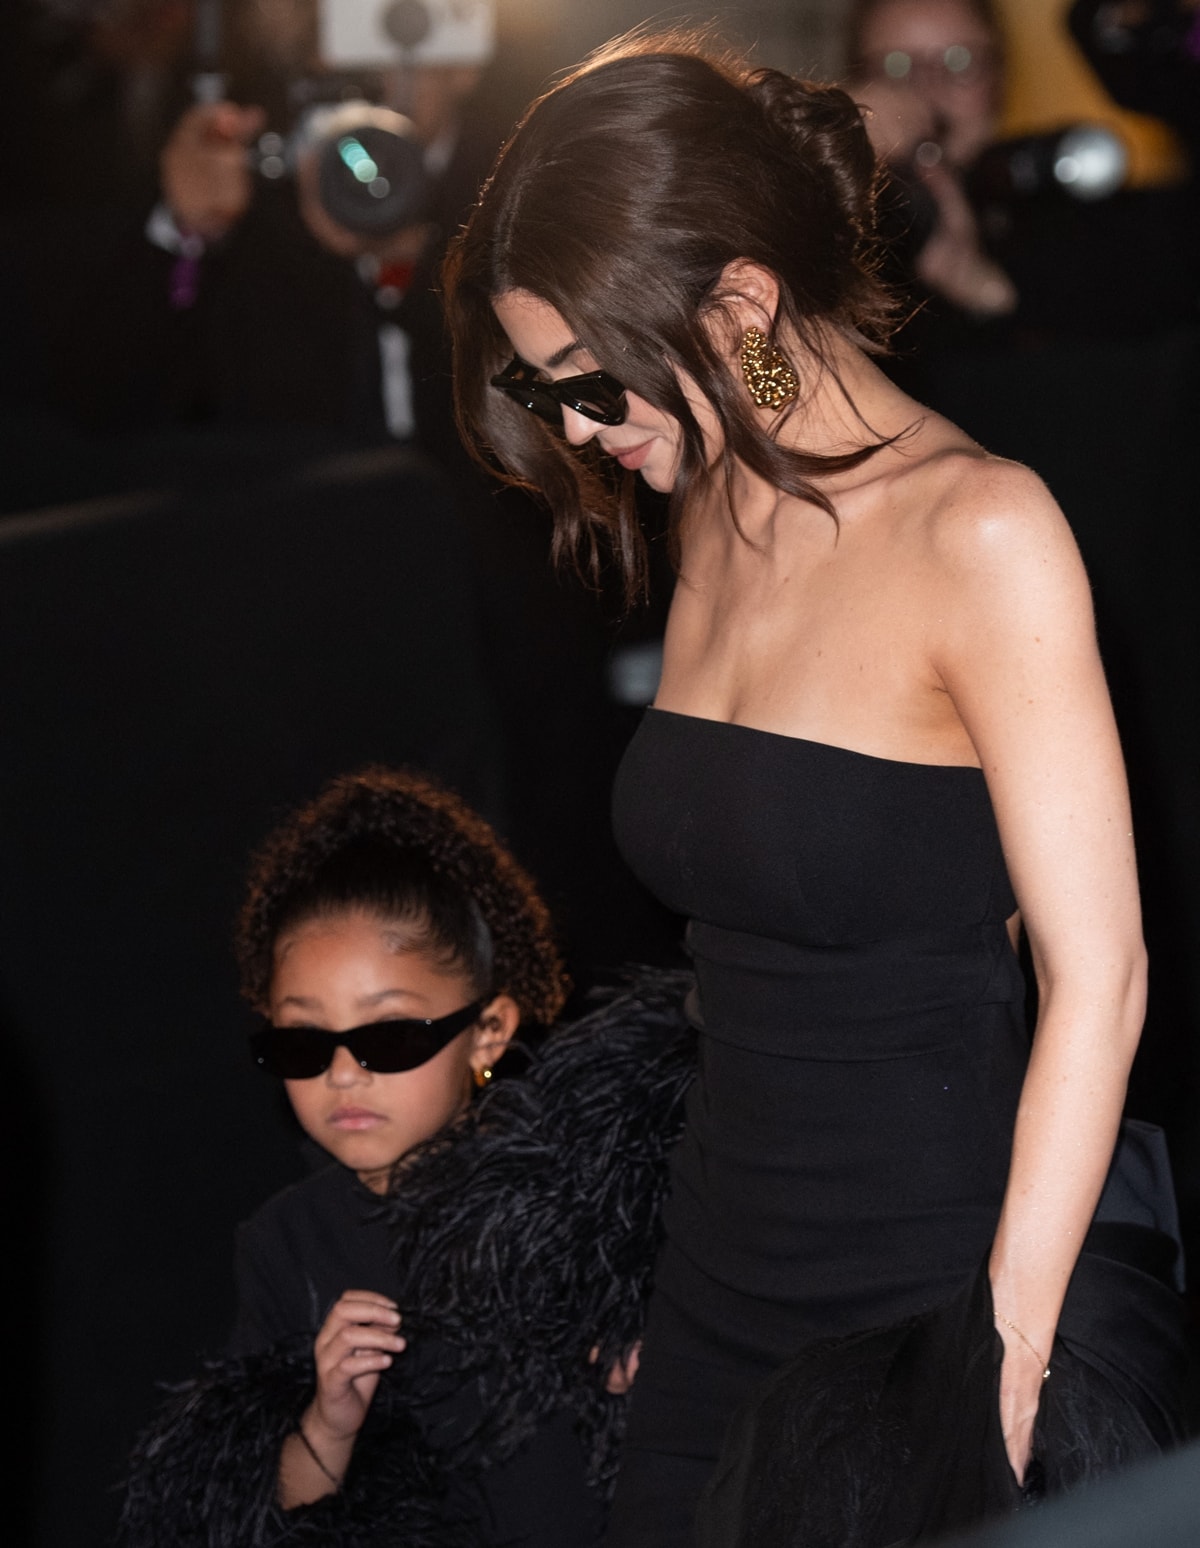 Stormi Webster, stepping into the spotlight, mirrors her mother's fashionista flair at just five years old, with a mini-version of Kylie's elegant black dress